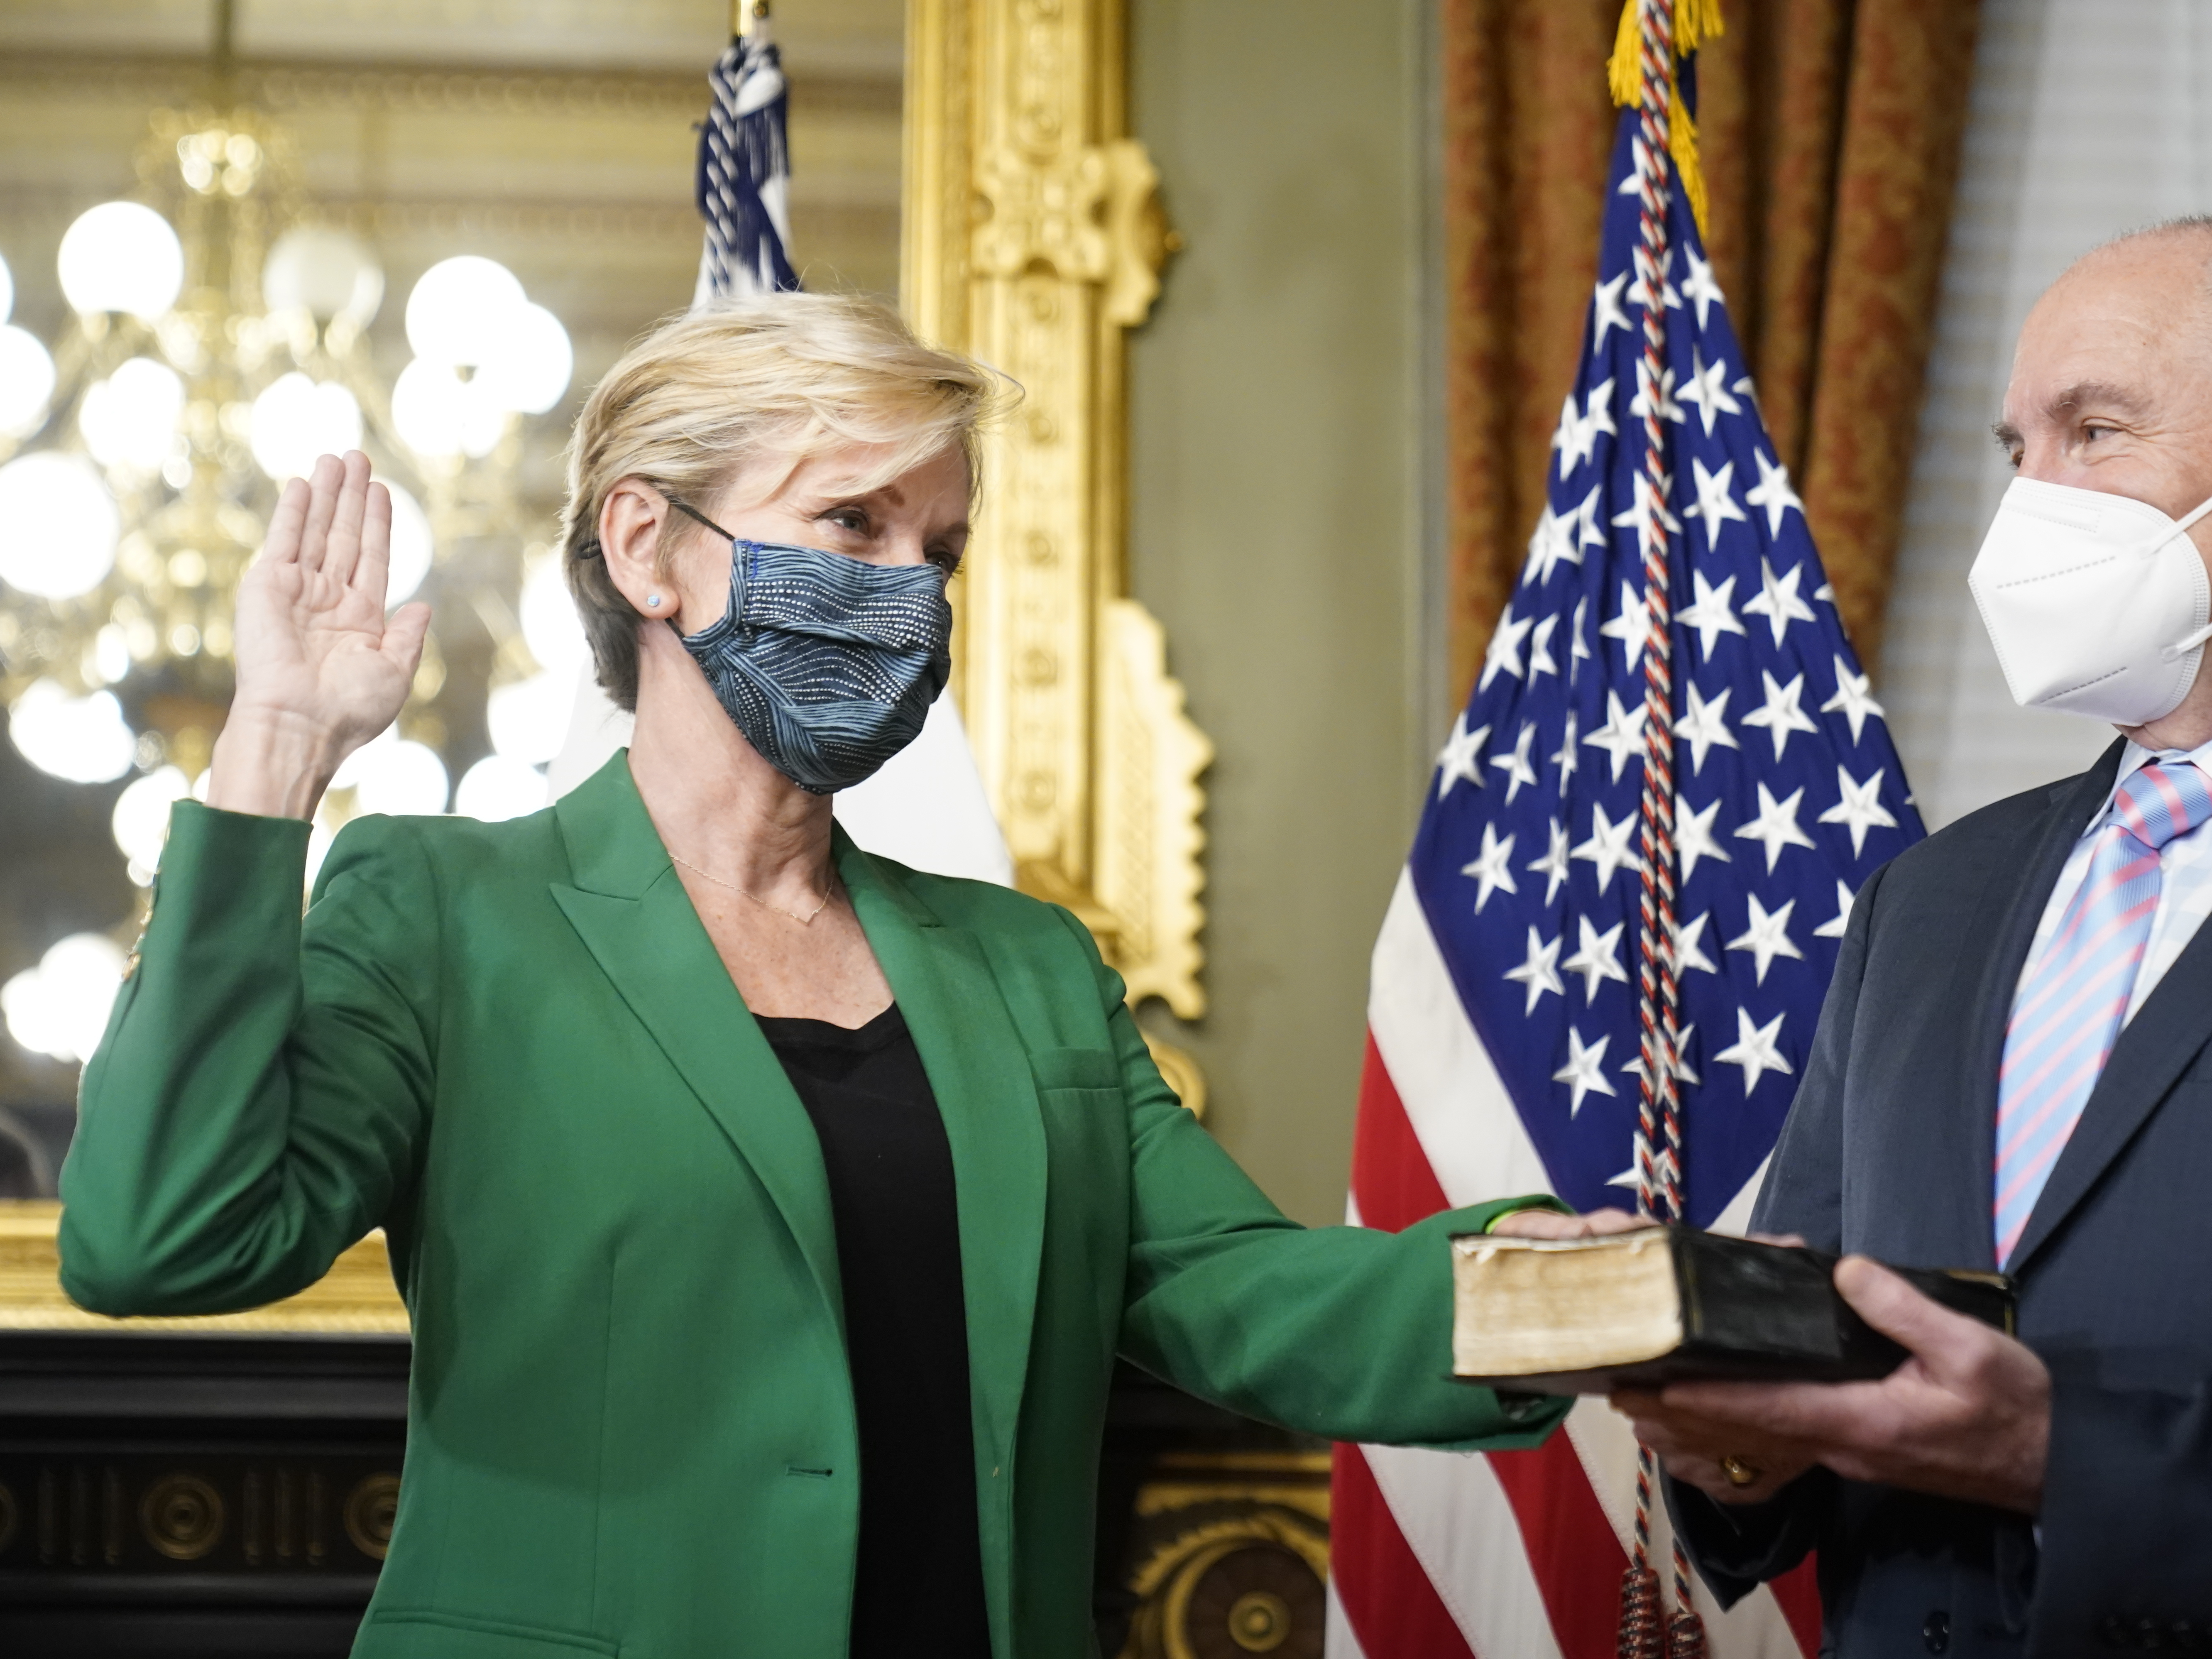 Jennifer Granholm is sworn in as energy secretary Thursday. Granholm told NPR that pivoting to a clean energy economy could ensure a dependable grid and help create jobs. Andrew Harnik/AP